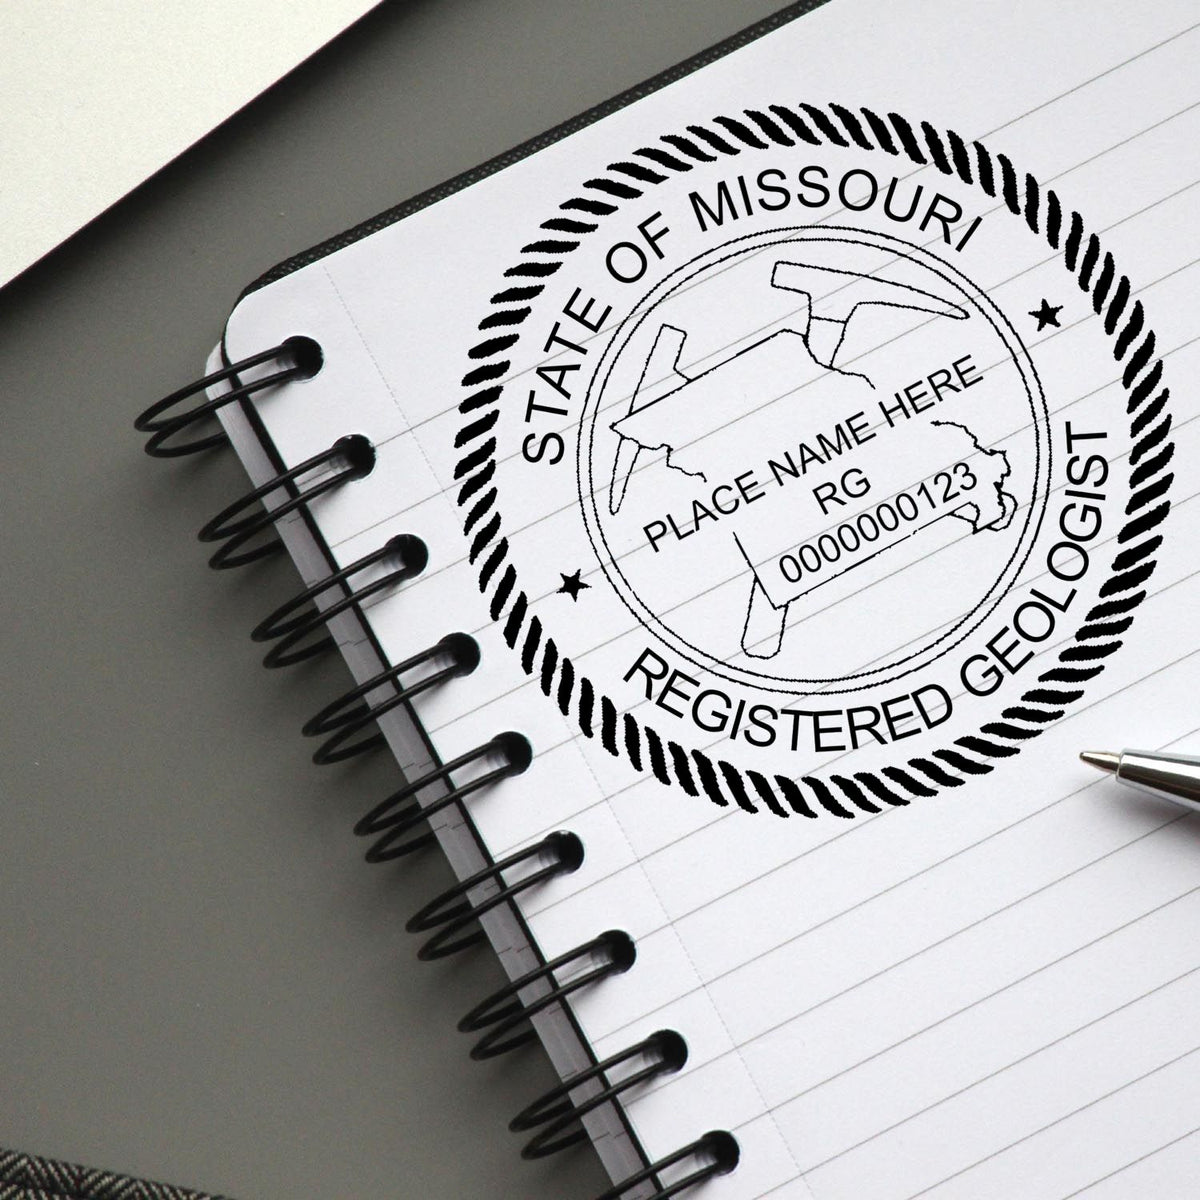 The Missouri Professional Geologist Seal Stamp stamp impression comes to life with a crisp, detailed image stamped on paper - showcasing true professional quality.